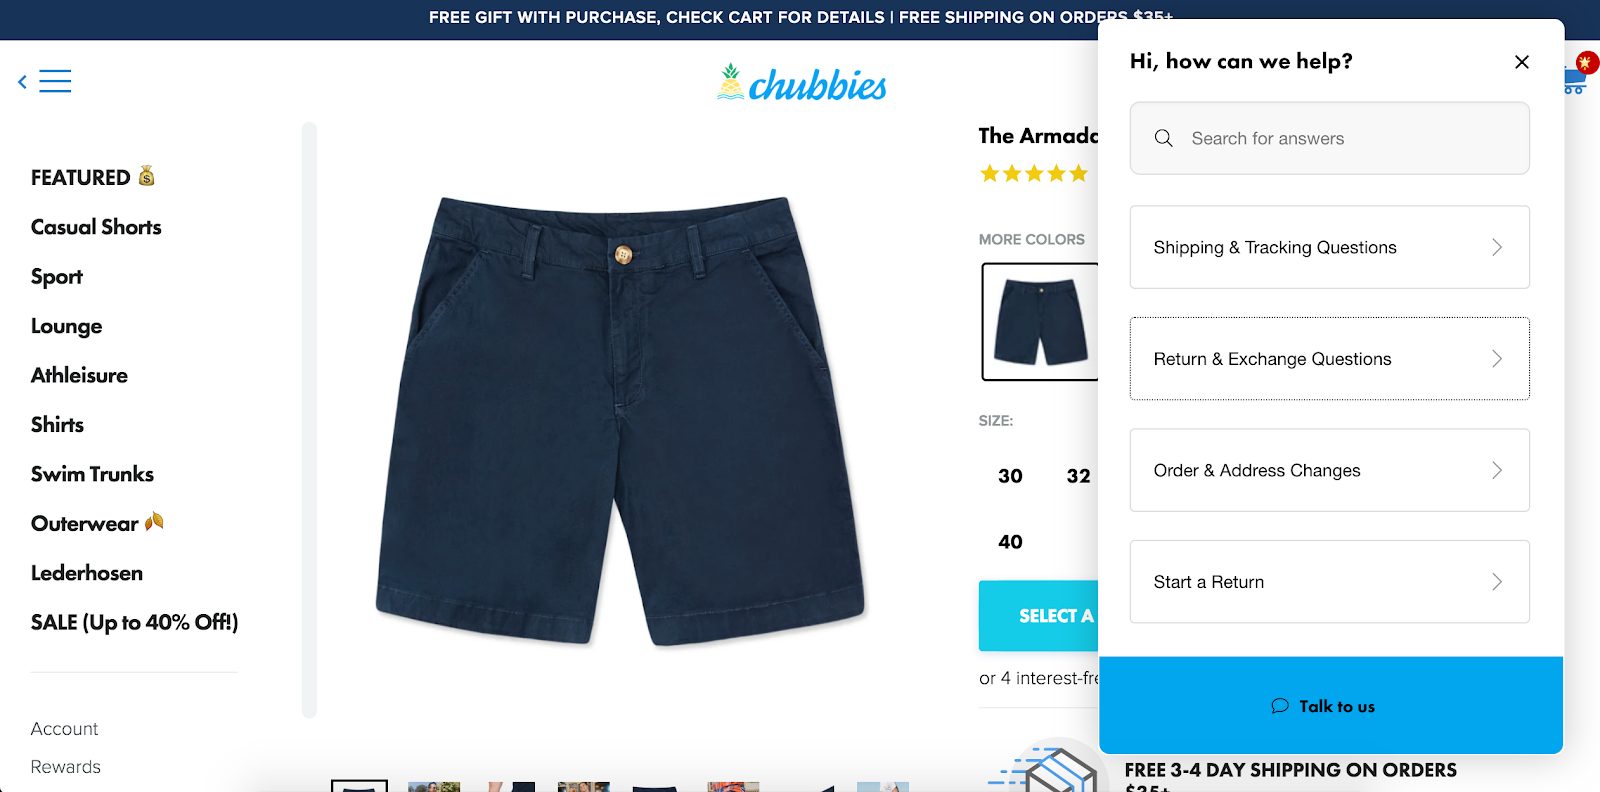 Chubbies shorts product page with pop-up that includes a section on returns.